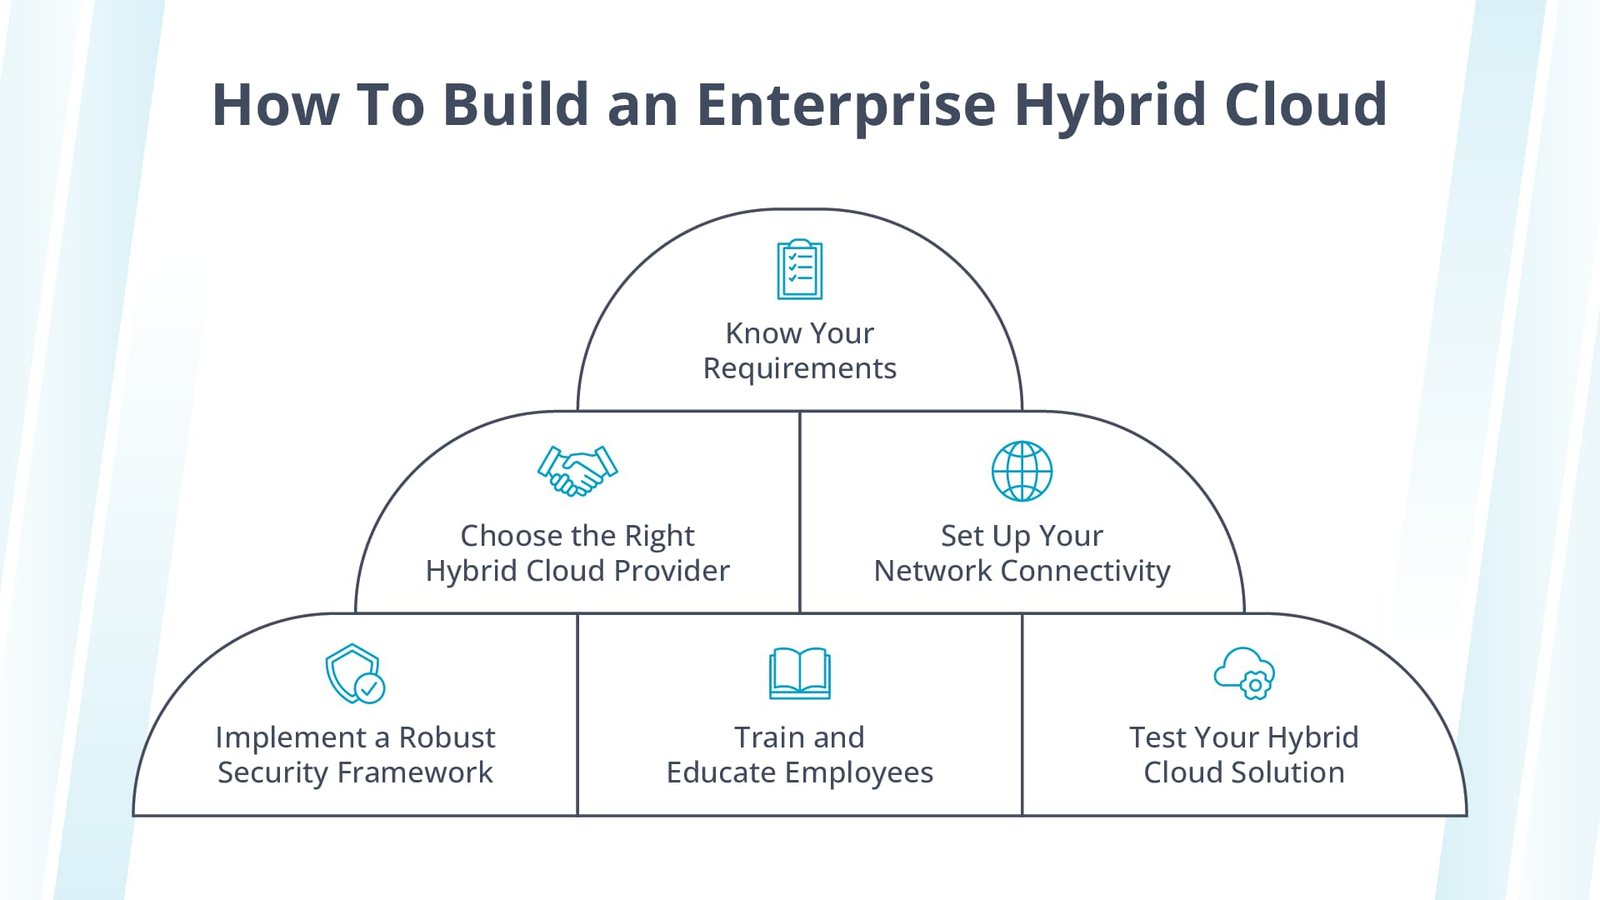 Create a well-thought-out enterprise hybrid cloud strategy to ensure successful implementation.